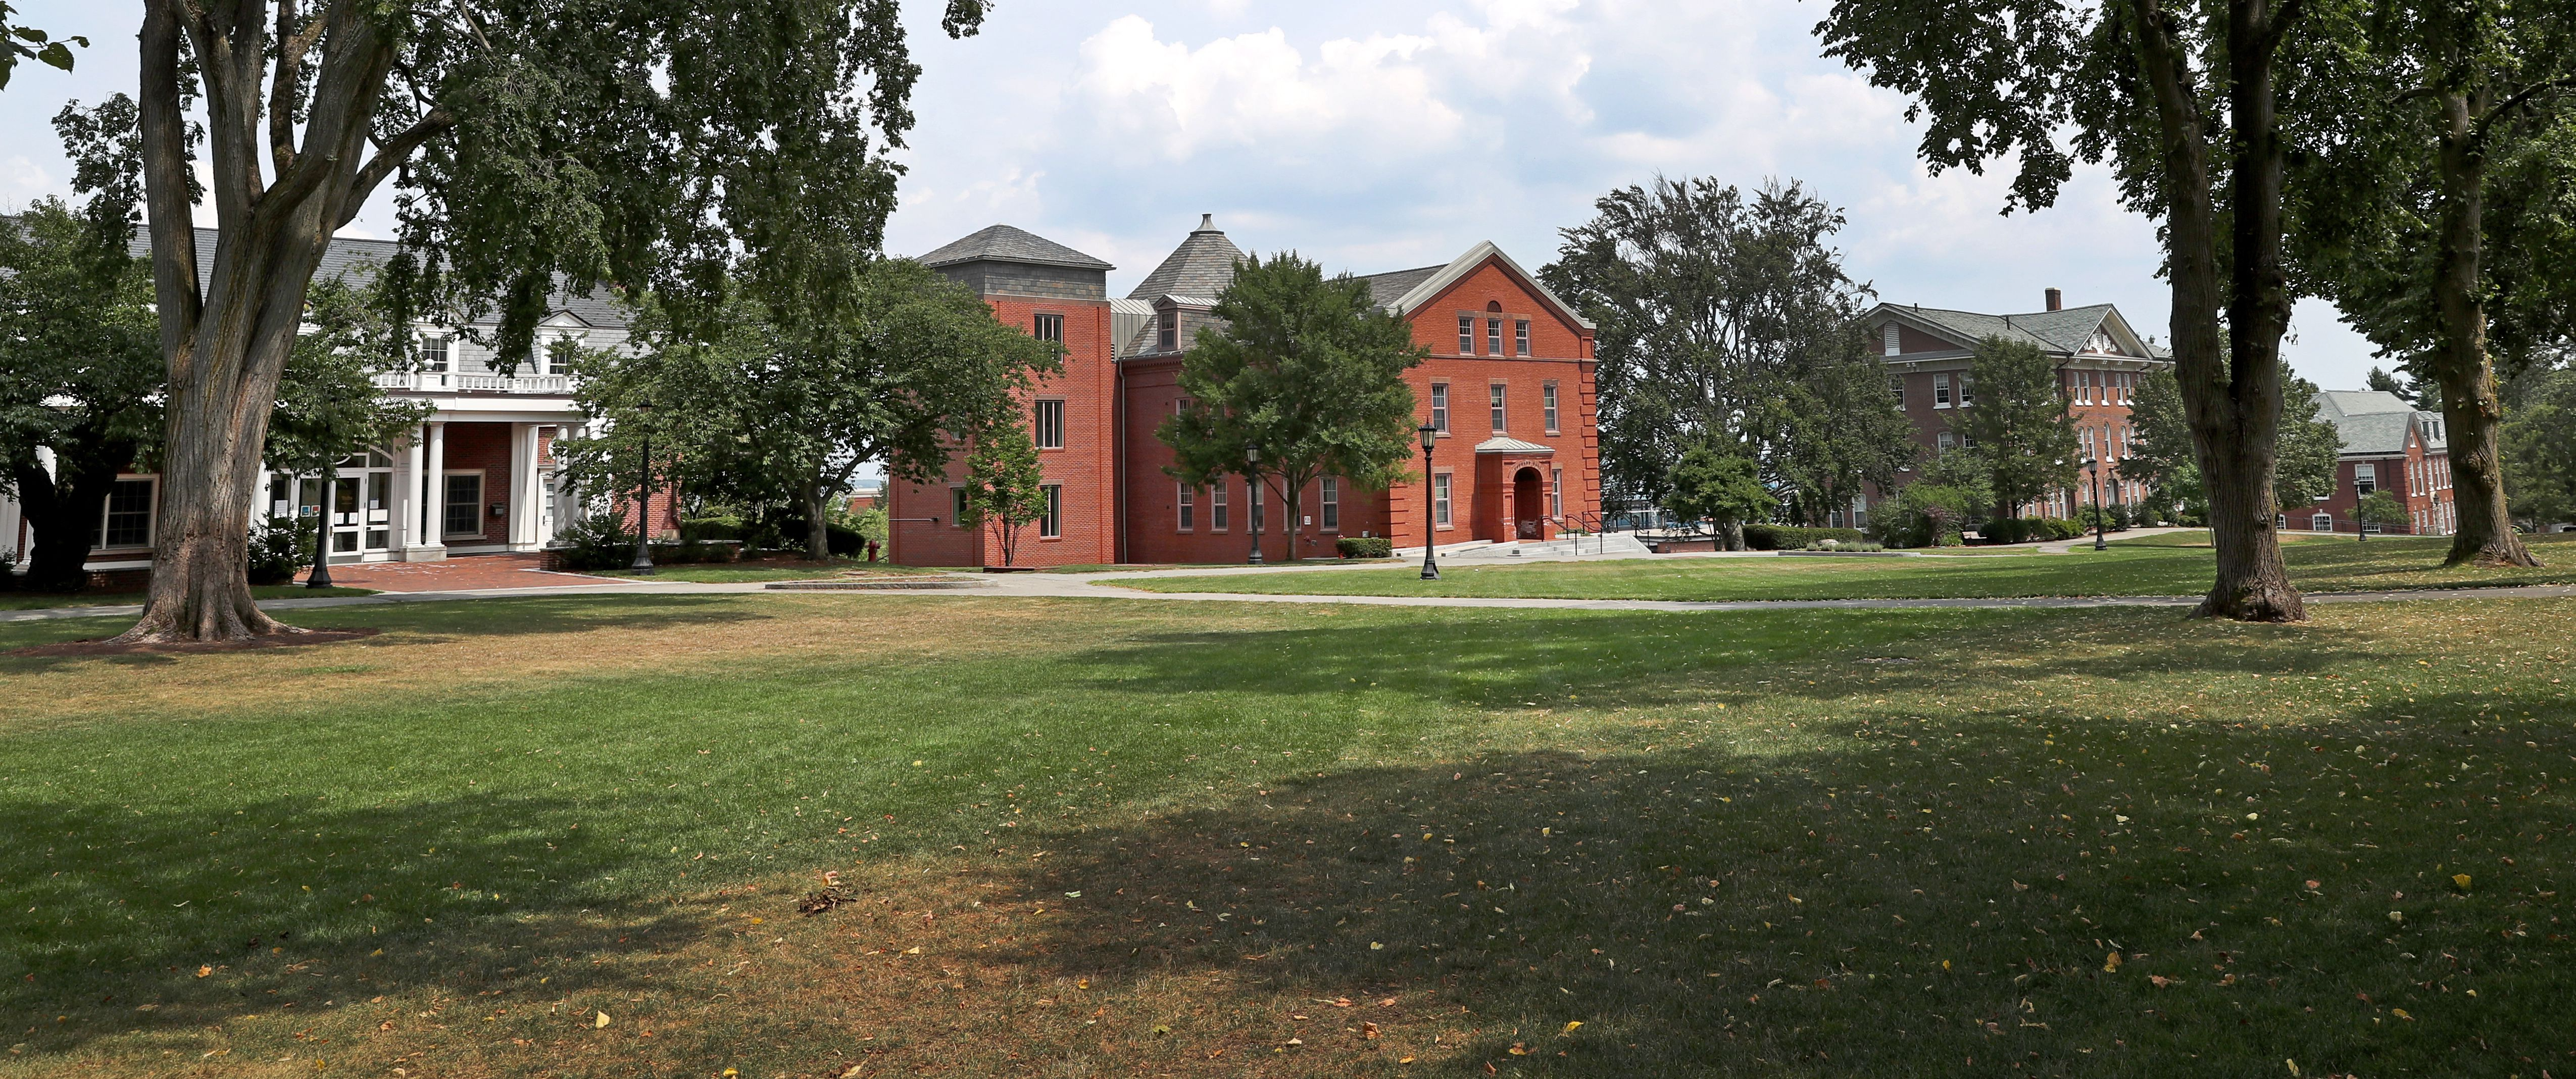 A college campus with a green yard in the foreground and red brick buildings in the distance